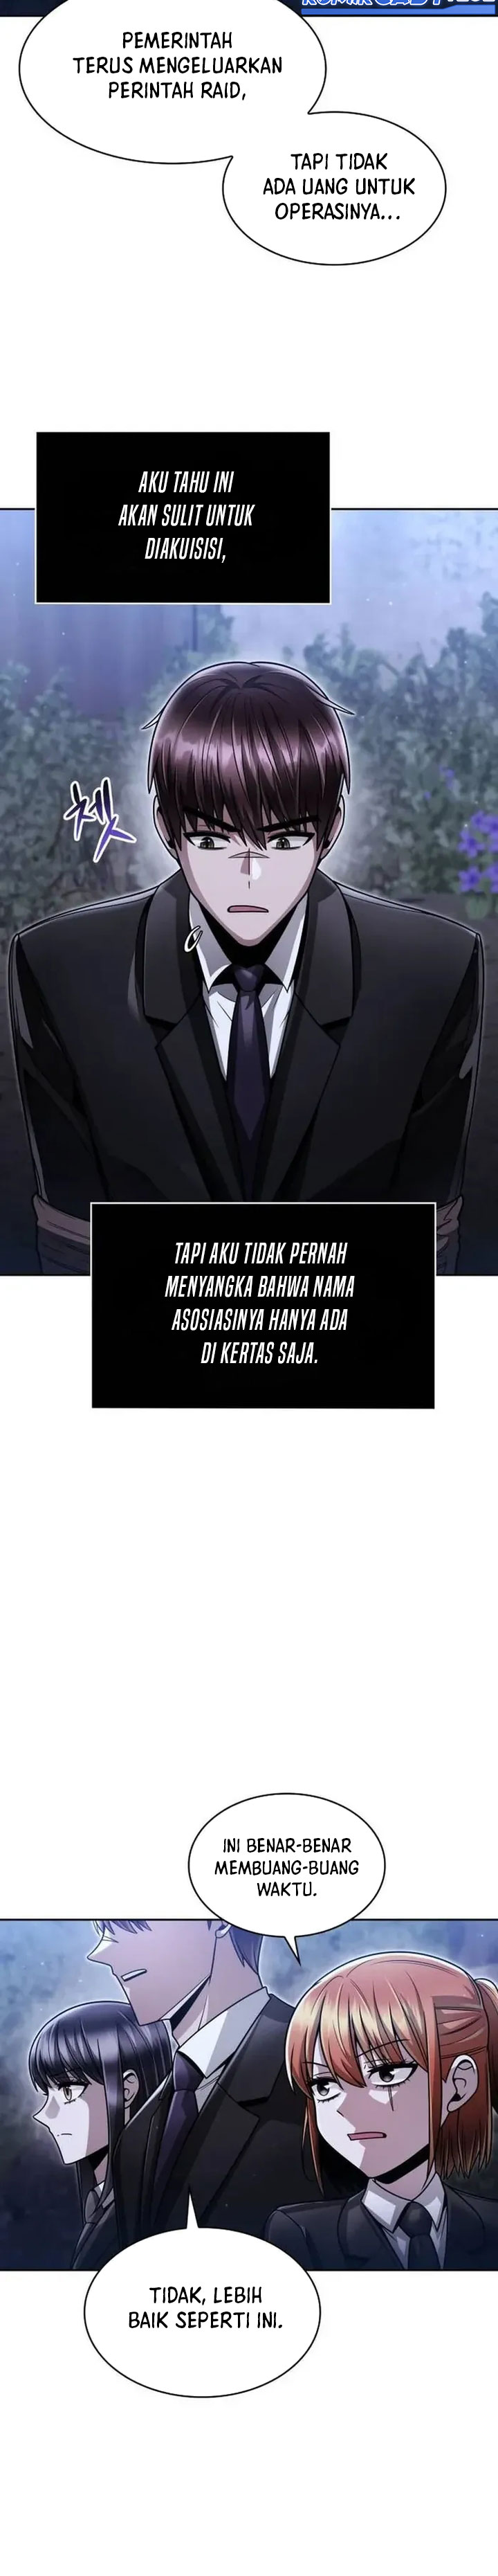 Dilarang COPAS - situs resmi www.mangacanblog.com - Komik clever cleaning life of the returned genius hunter 058 - chapter 58 59 Indonesia clever cleaning life of the returned genius hunter 058 - chapter 58 Terbaru 28|Baca Manga Komik Indonesia|Mangacan